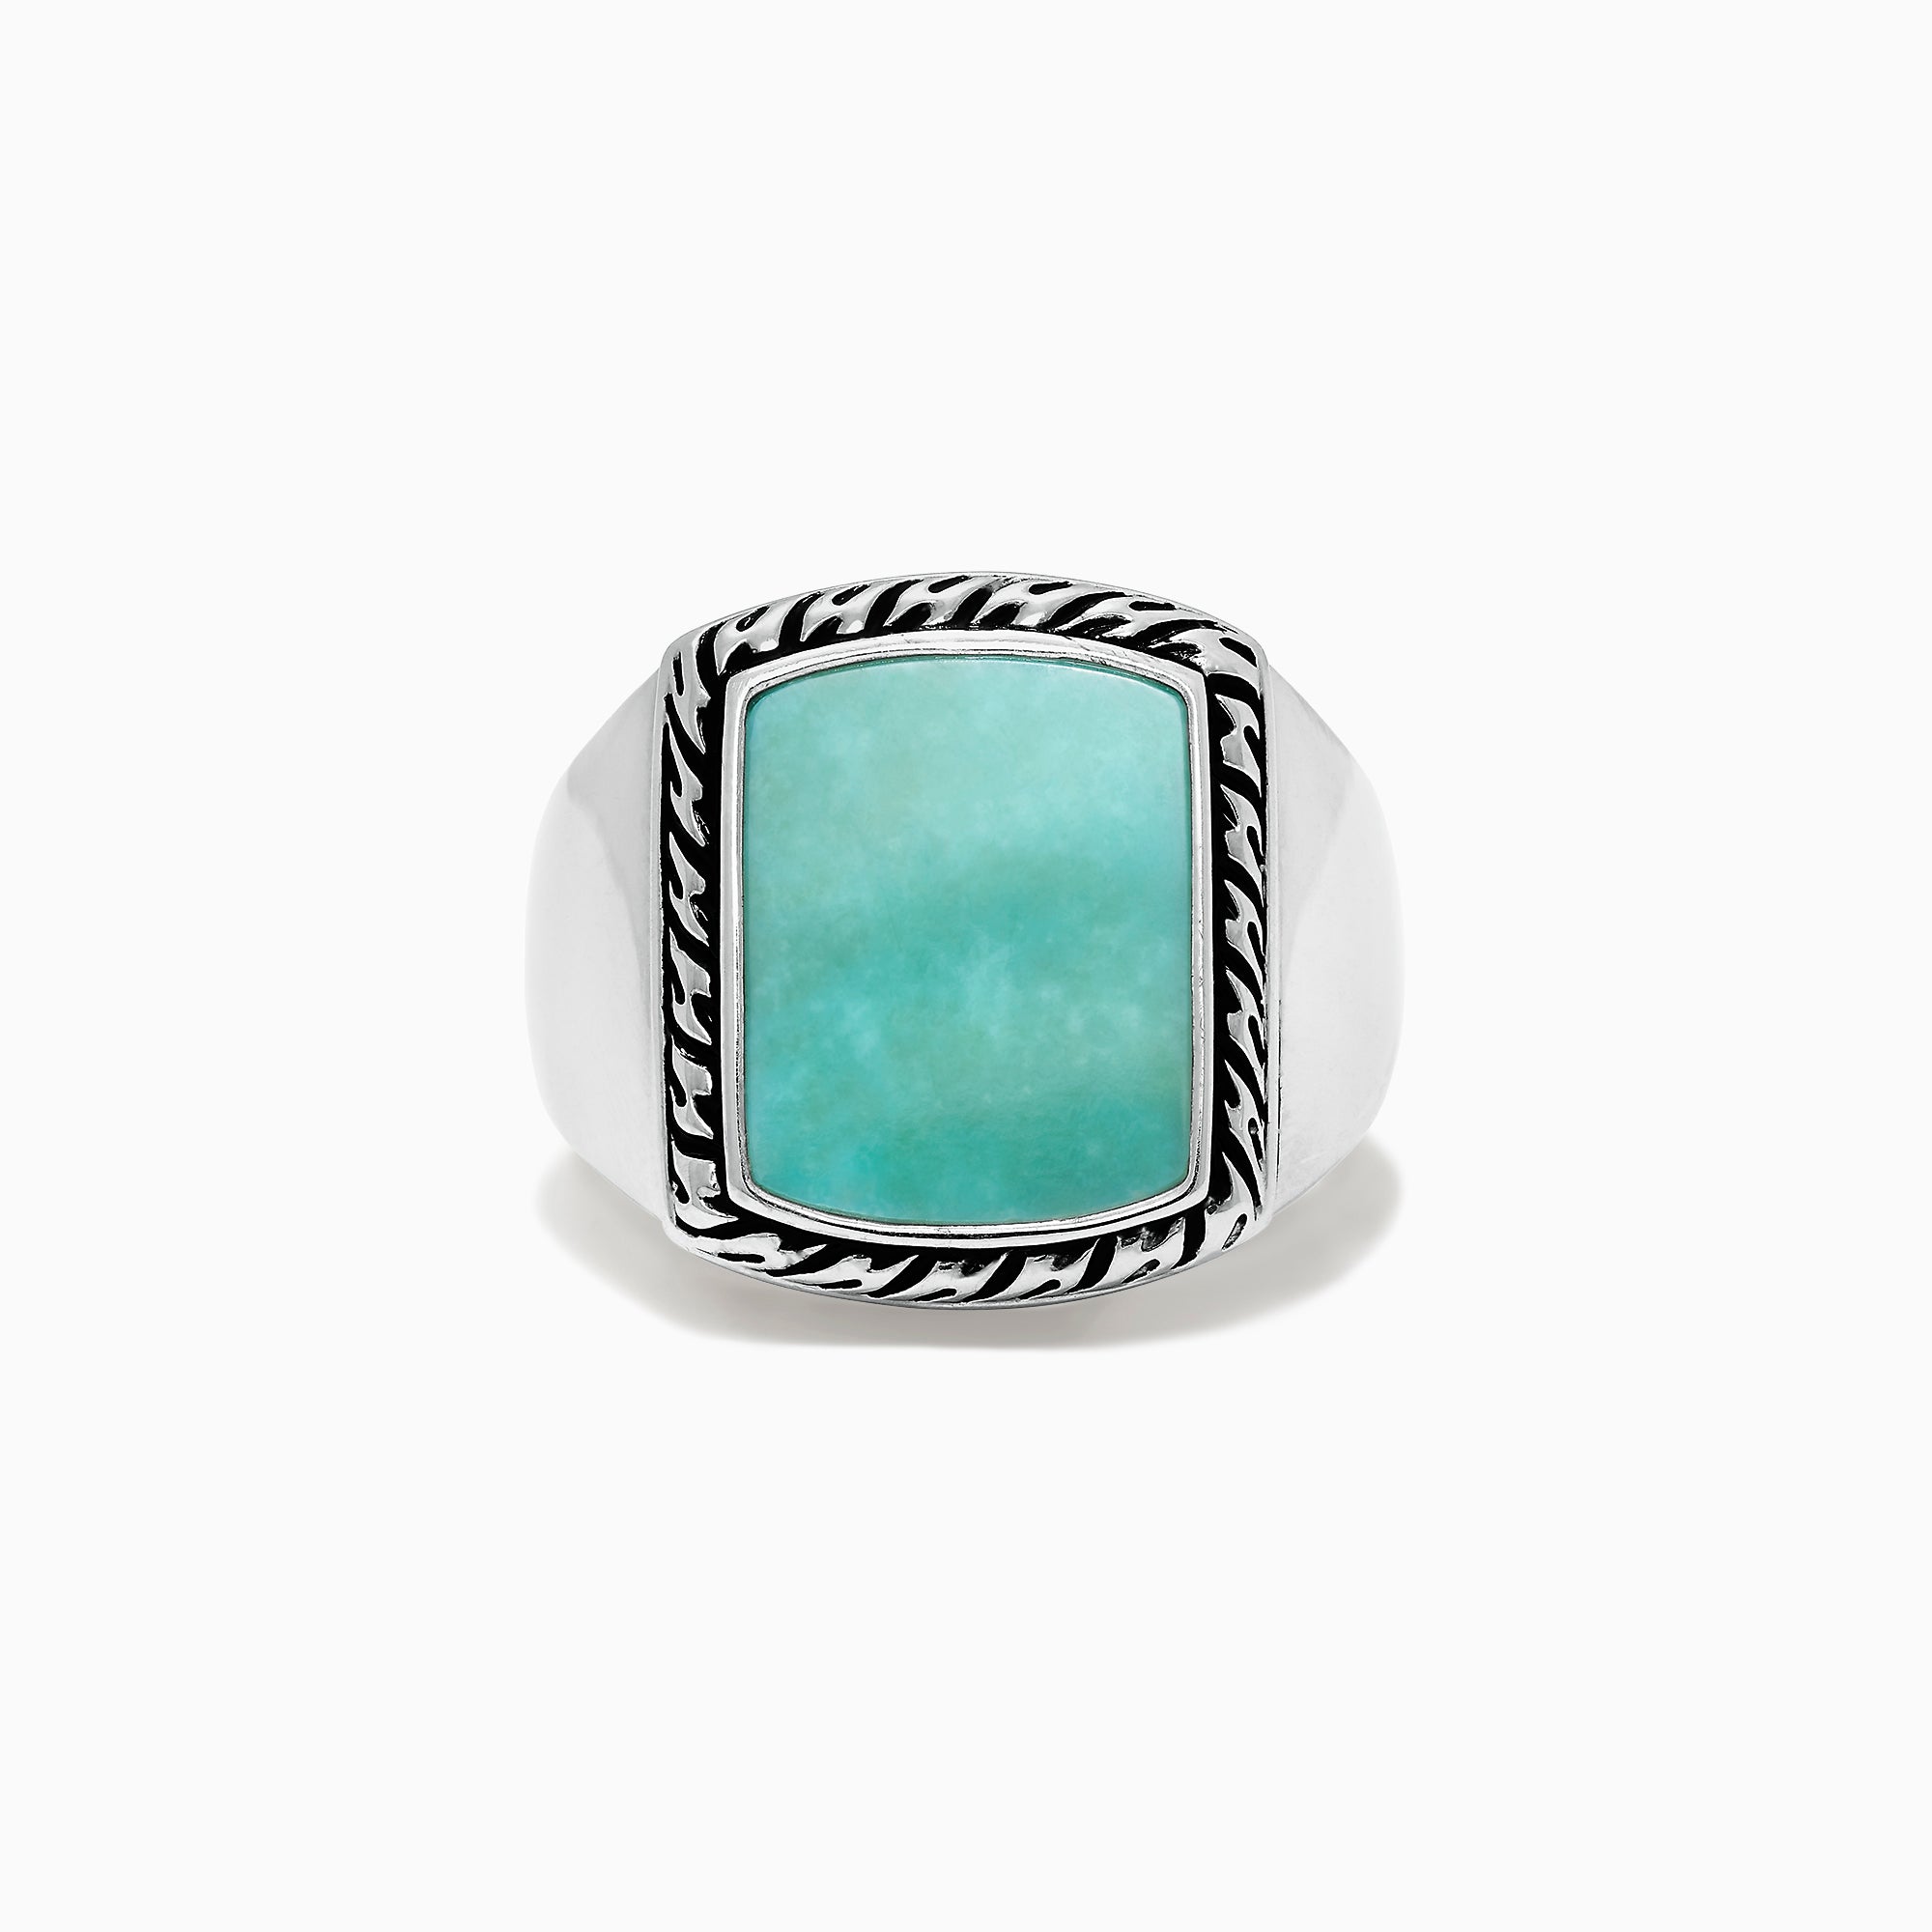 Effy Men's Sterling Silver Turquoise Signet Ring, 3.90 TCW